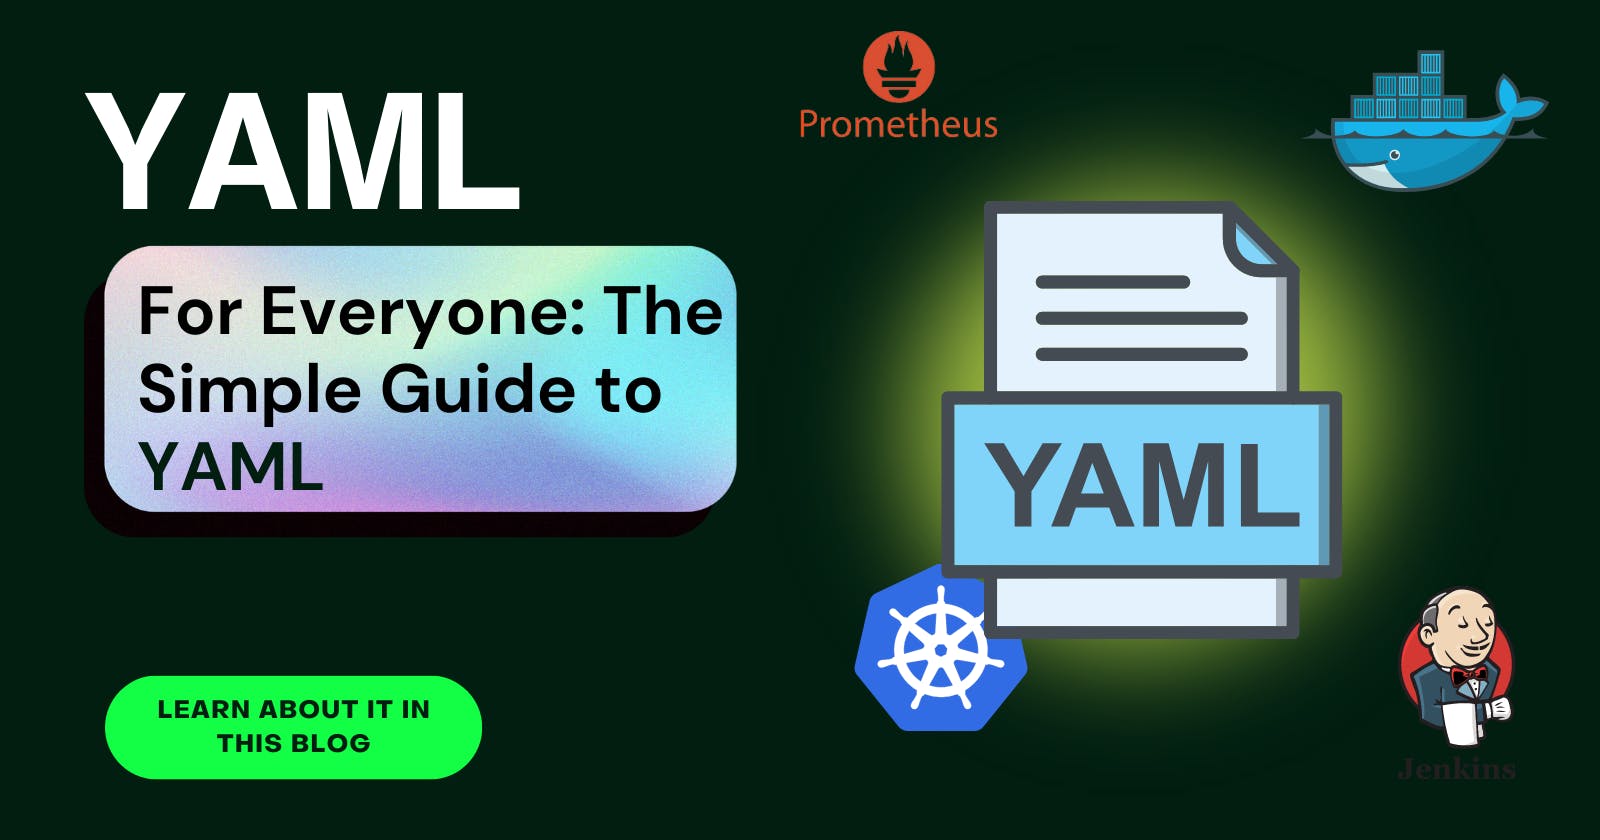 YAML for Everyone: The Simple Guide to YAML